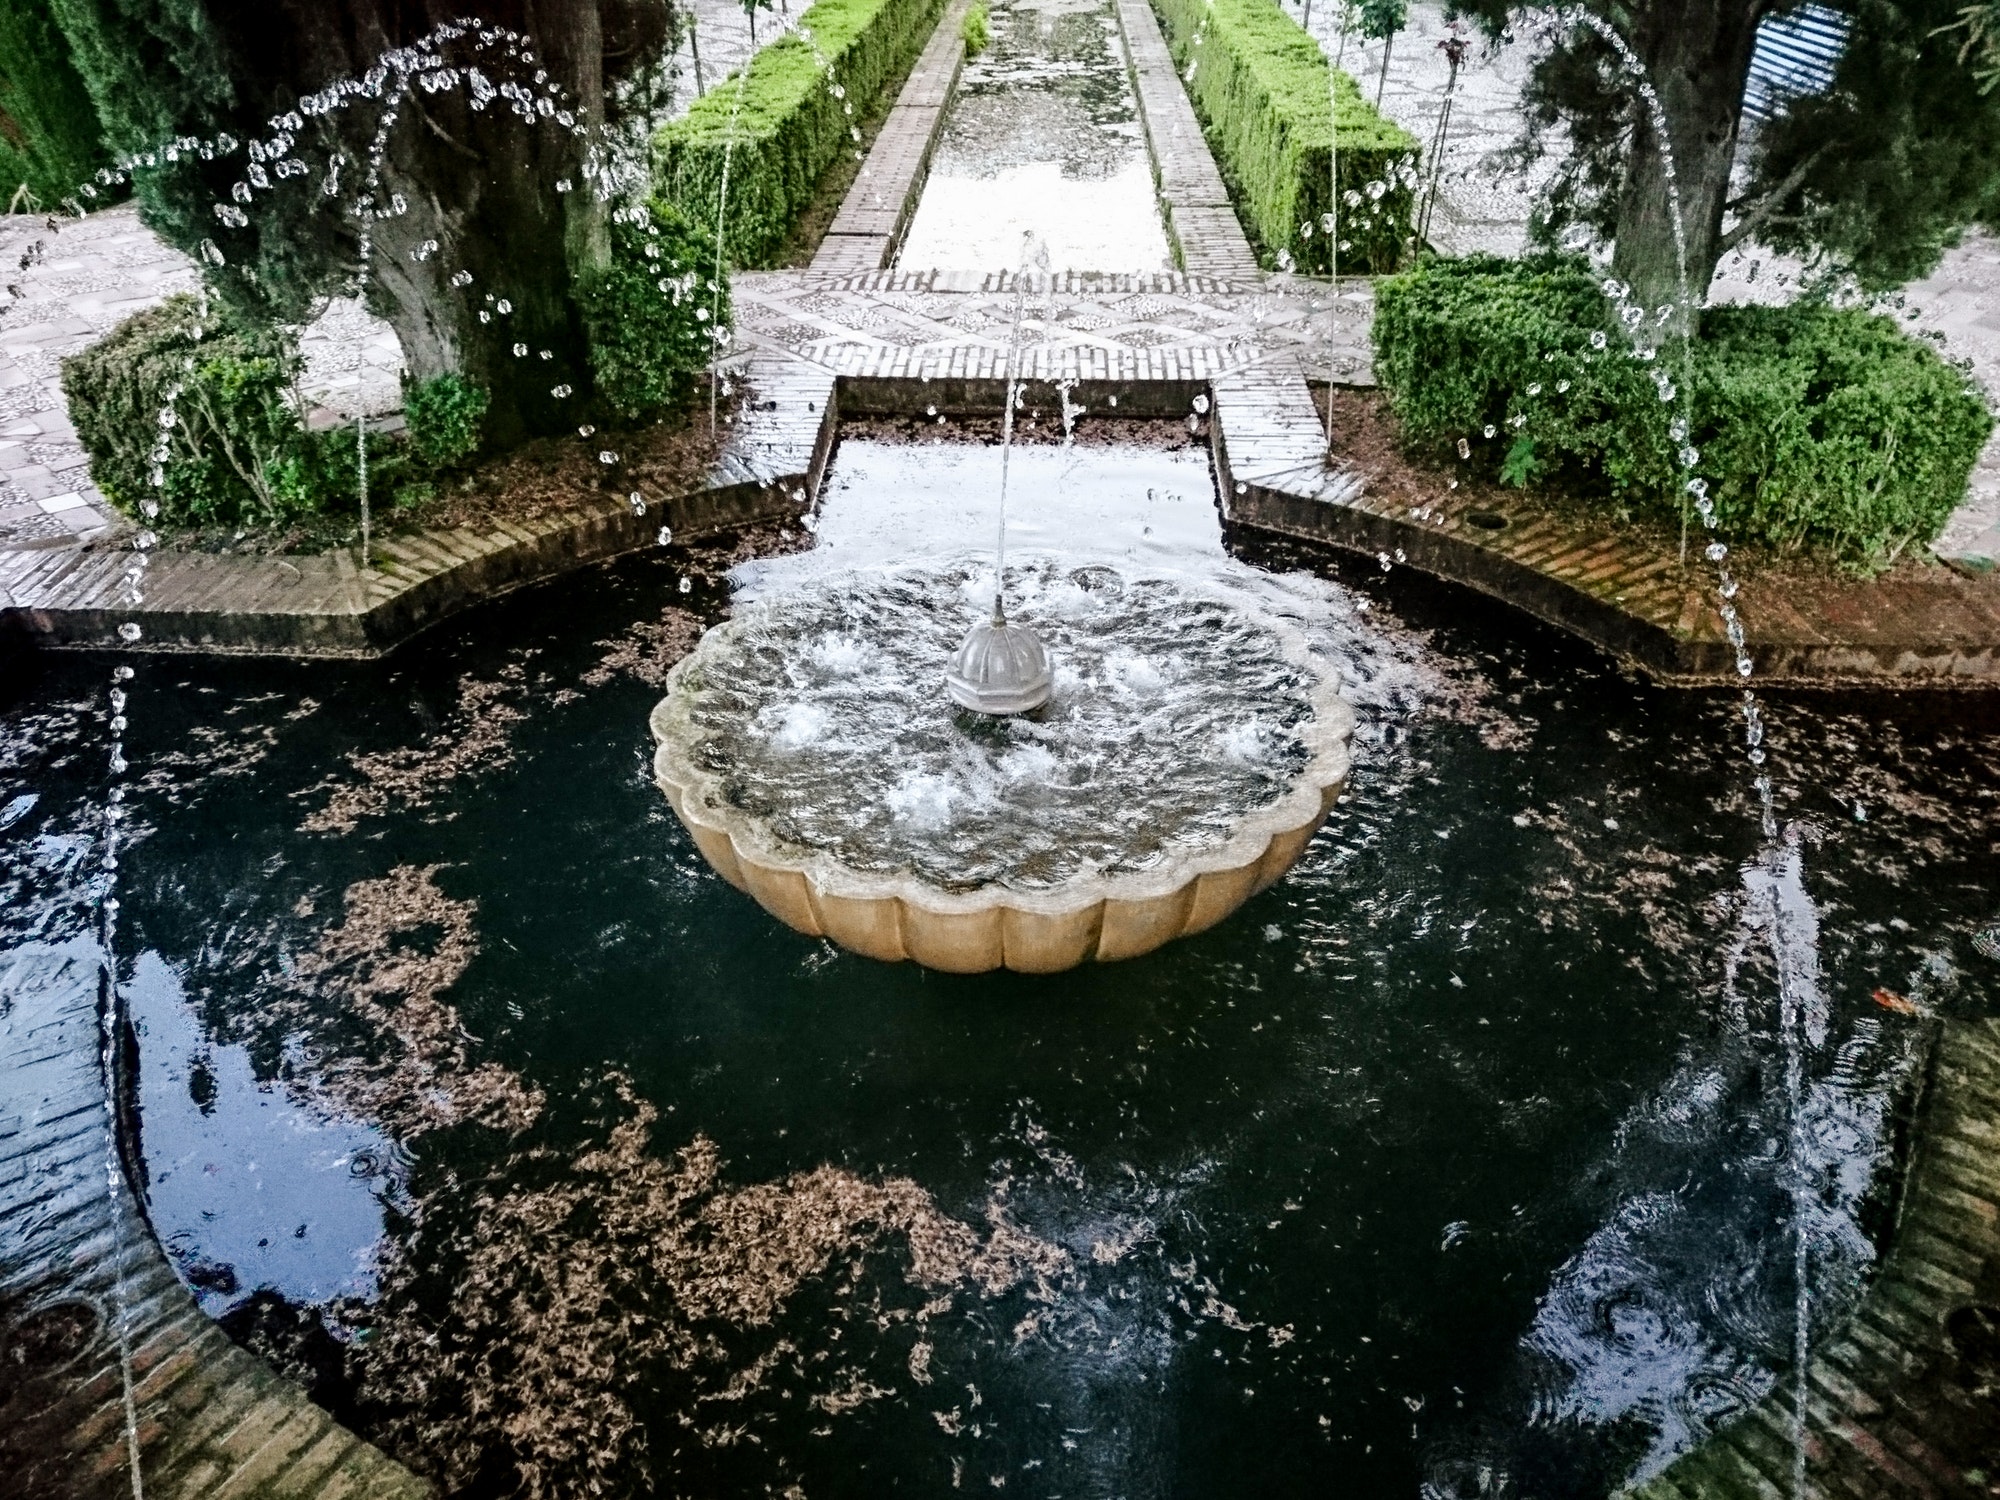 Fountain in the gardens of the Generalife Palace